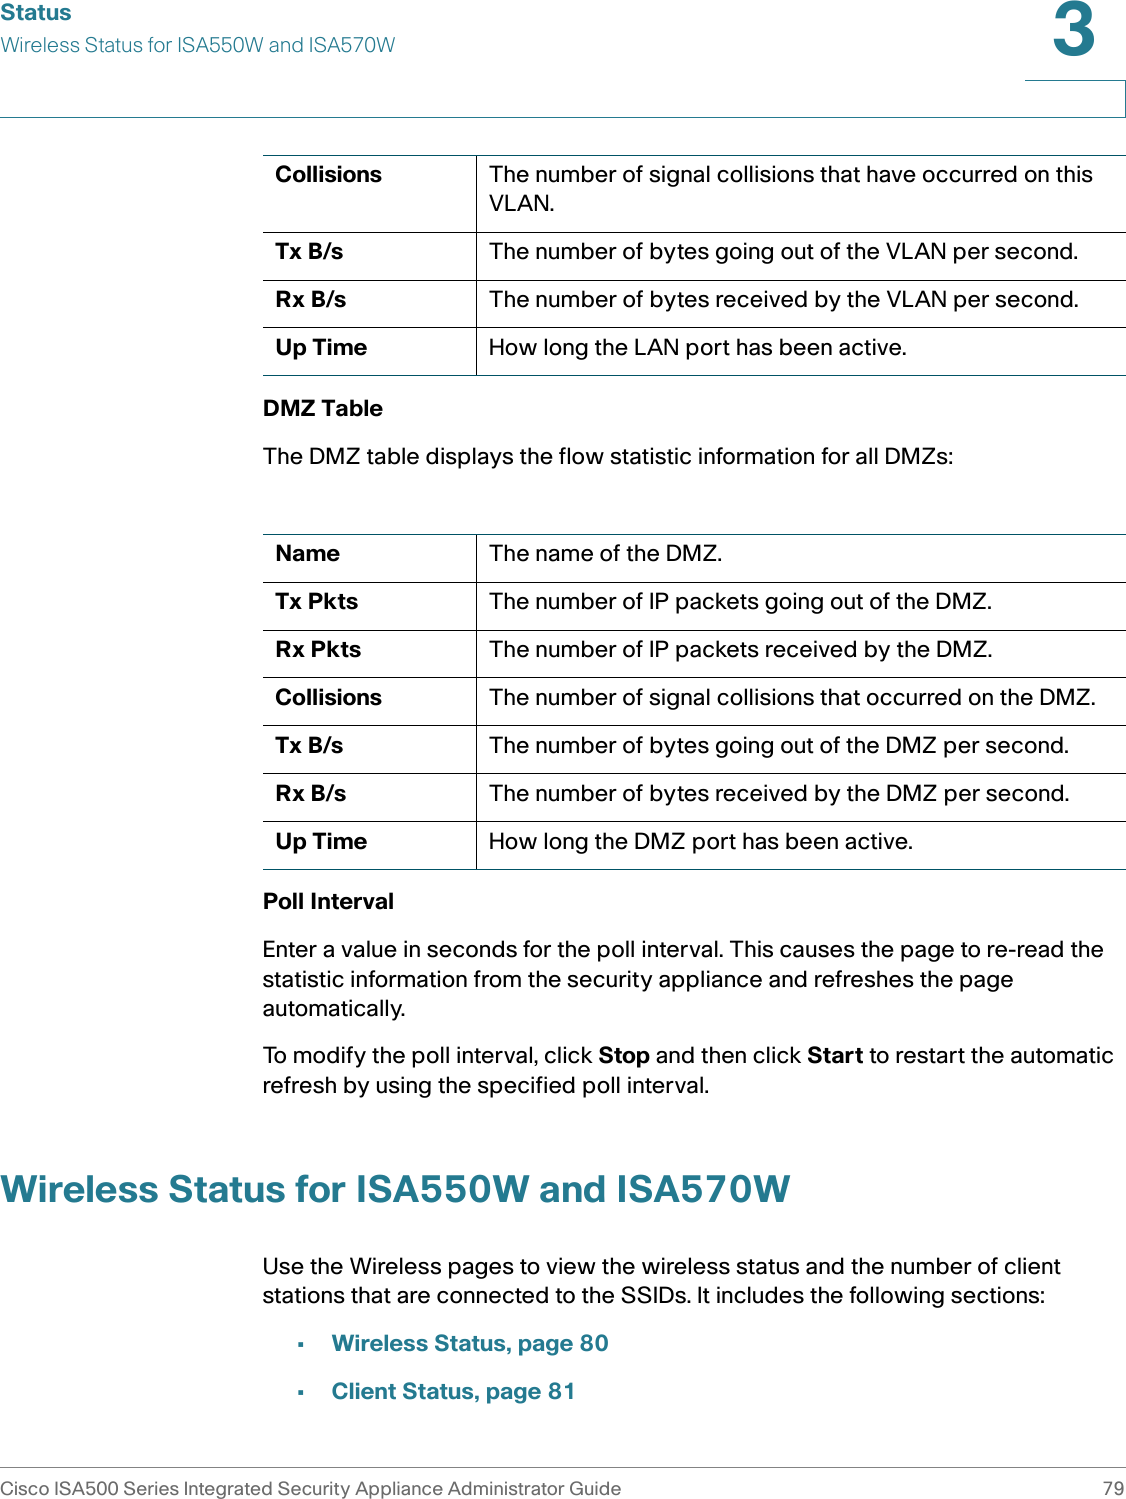 StatusWireless Status for ISA550W and ISA570WCisco ISA500 Series Integrated Security Appliance Administrator Guide 793 DMZ TableThe DMZ table displays the flow statistic information for all DMZs: Poll Interval Enter a value in seconds for the poll interval. This causes the page to re-read the statistic information from the security appliance and refreshes the page automatically. To modify the poll interval, click Stop and then click Start to restart the automatic refresh by using the specified poll interval.Wireless Status for ISA550W and ISA570WUse the Wireless pages to view the wireless status and the number of client stations that are connected to the SSIDs. It includes the following sections: •Wireless Status, page 80 •Client Status, page 81Collisions The number of signal collisions that have occurred on this VLAN.Tx B/s The number of bytes going out of the VLAN per second.Rx B/s The number of bytes received by the VLAN per second.Up Time How long the LAN port has been active. Name The name of the DMZ.Tx Pkts The number of IP packets going out of the DMZ.Rx Pkts The number of IP packets received by the DMZ.Collisions The number of signal collisions that occurred on the DMZ.Tx B/s The number of bytes going out of the DMZ per second.Rx B/s The number of bytes received by the DMZ per second.Up Time How long the DMZ port has been active. 